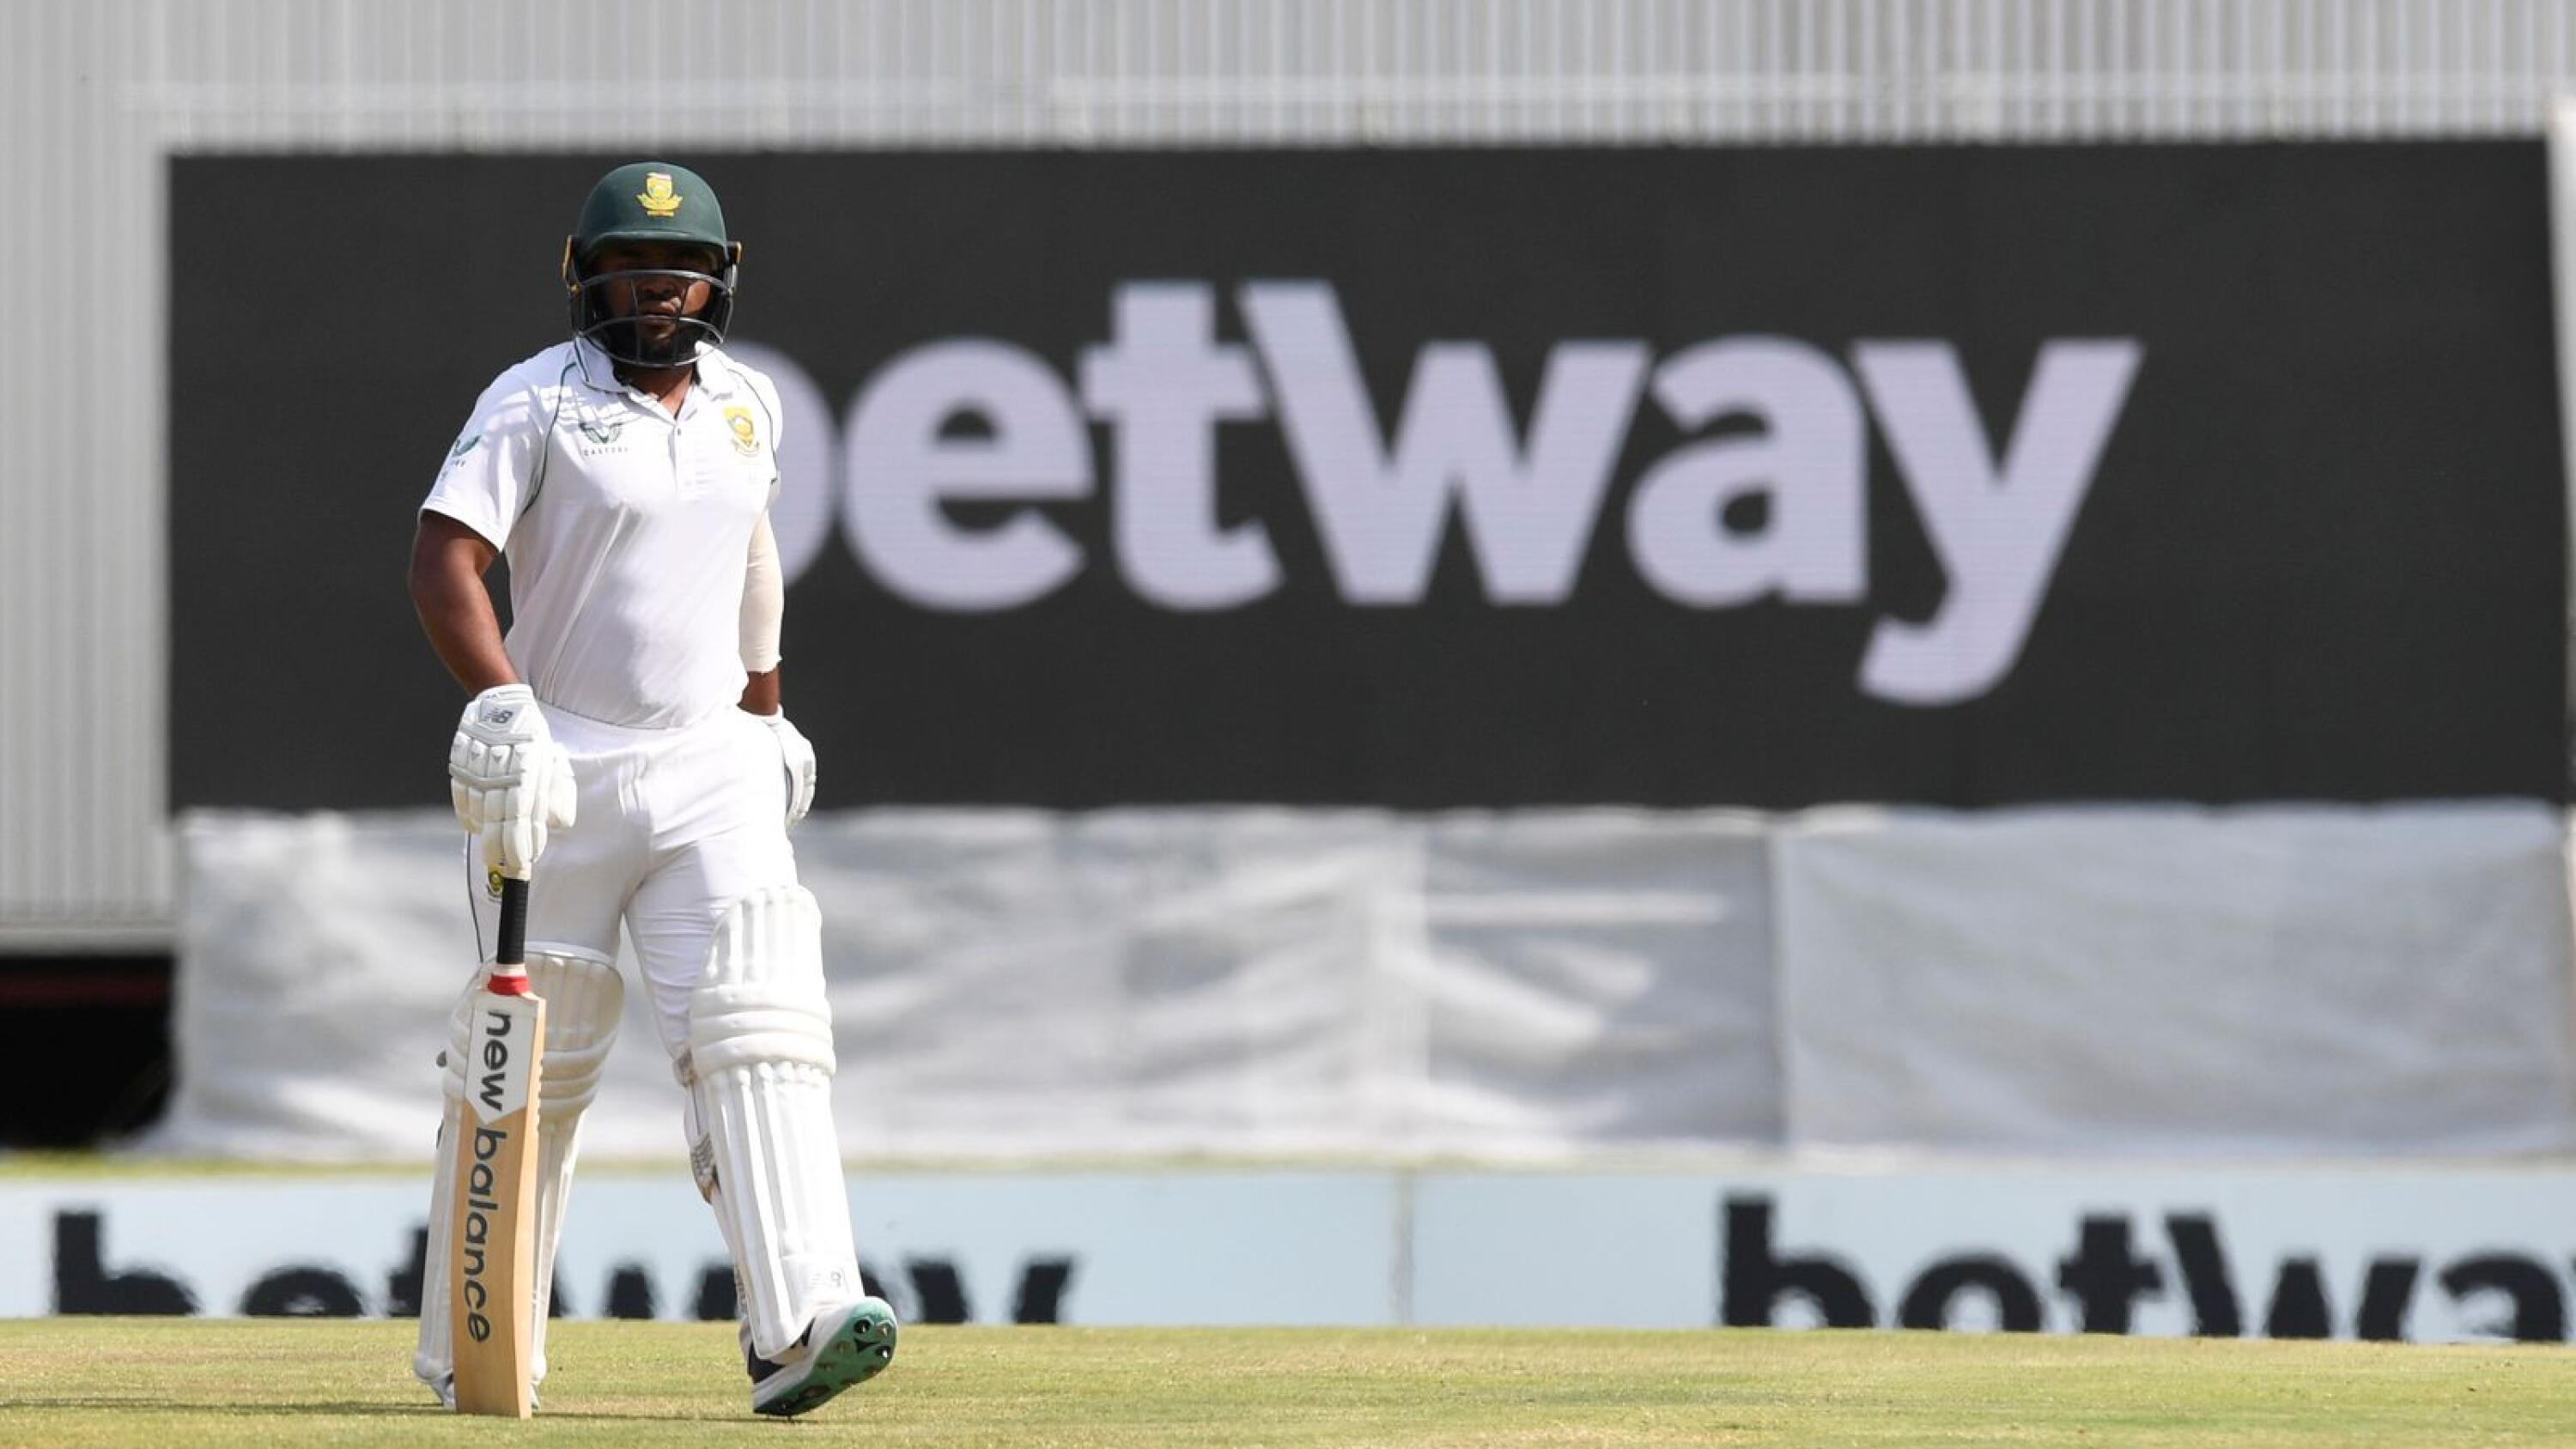 Proteas captain Temba Bavuma walks back to the pavillion after being dismissed without scoring on day one of the first Test against the West Indies at SuperSport Park in Centurion on Tuesday